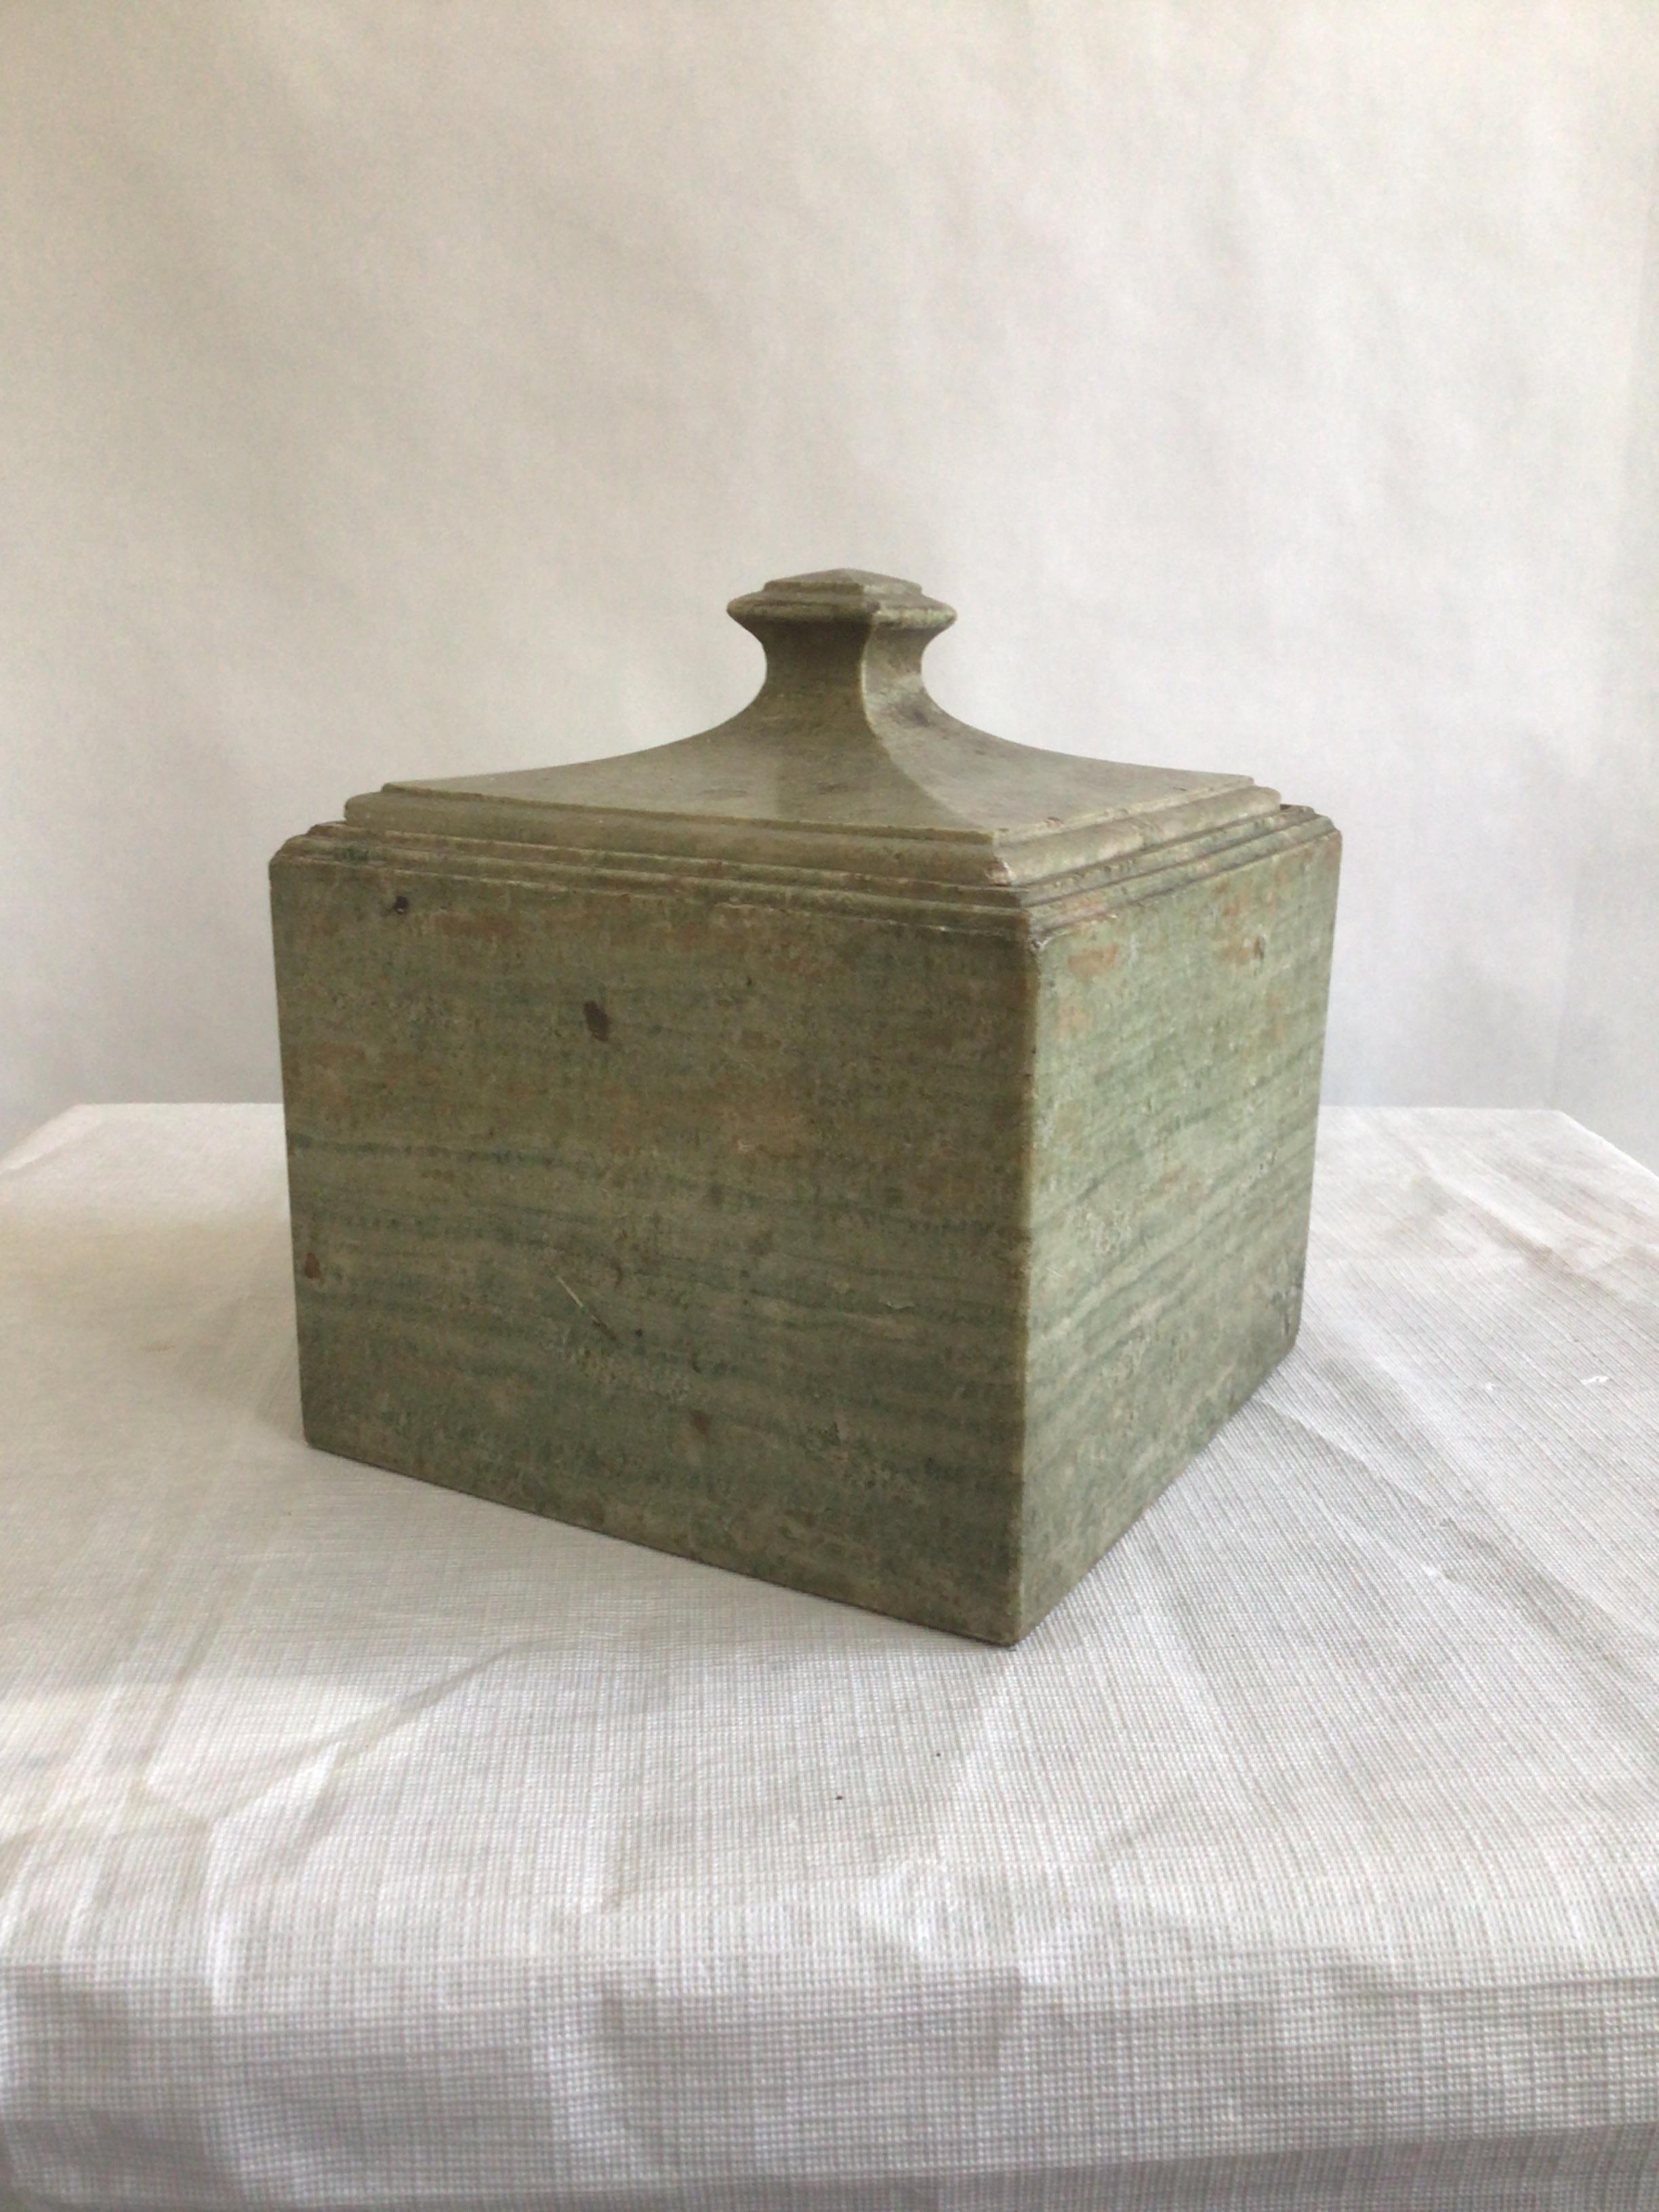 1940s Square Green Marble Box With Sculpted Lid
Small knick on top (as shown in pictures)